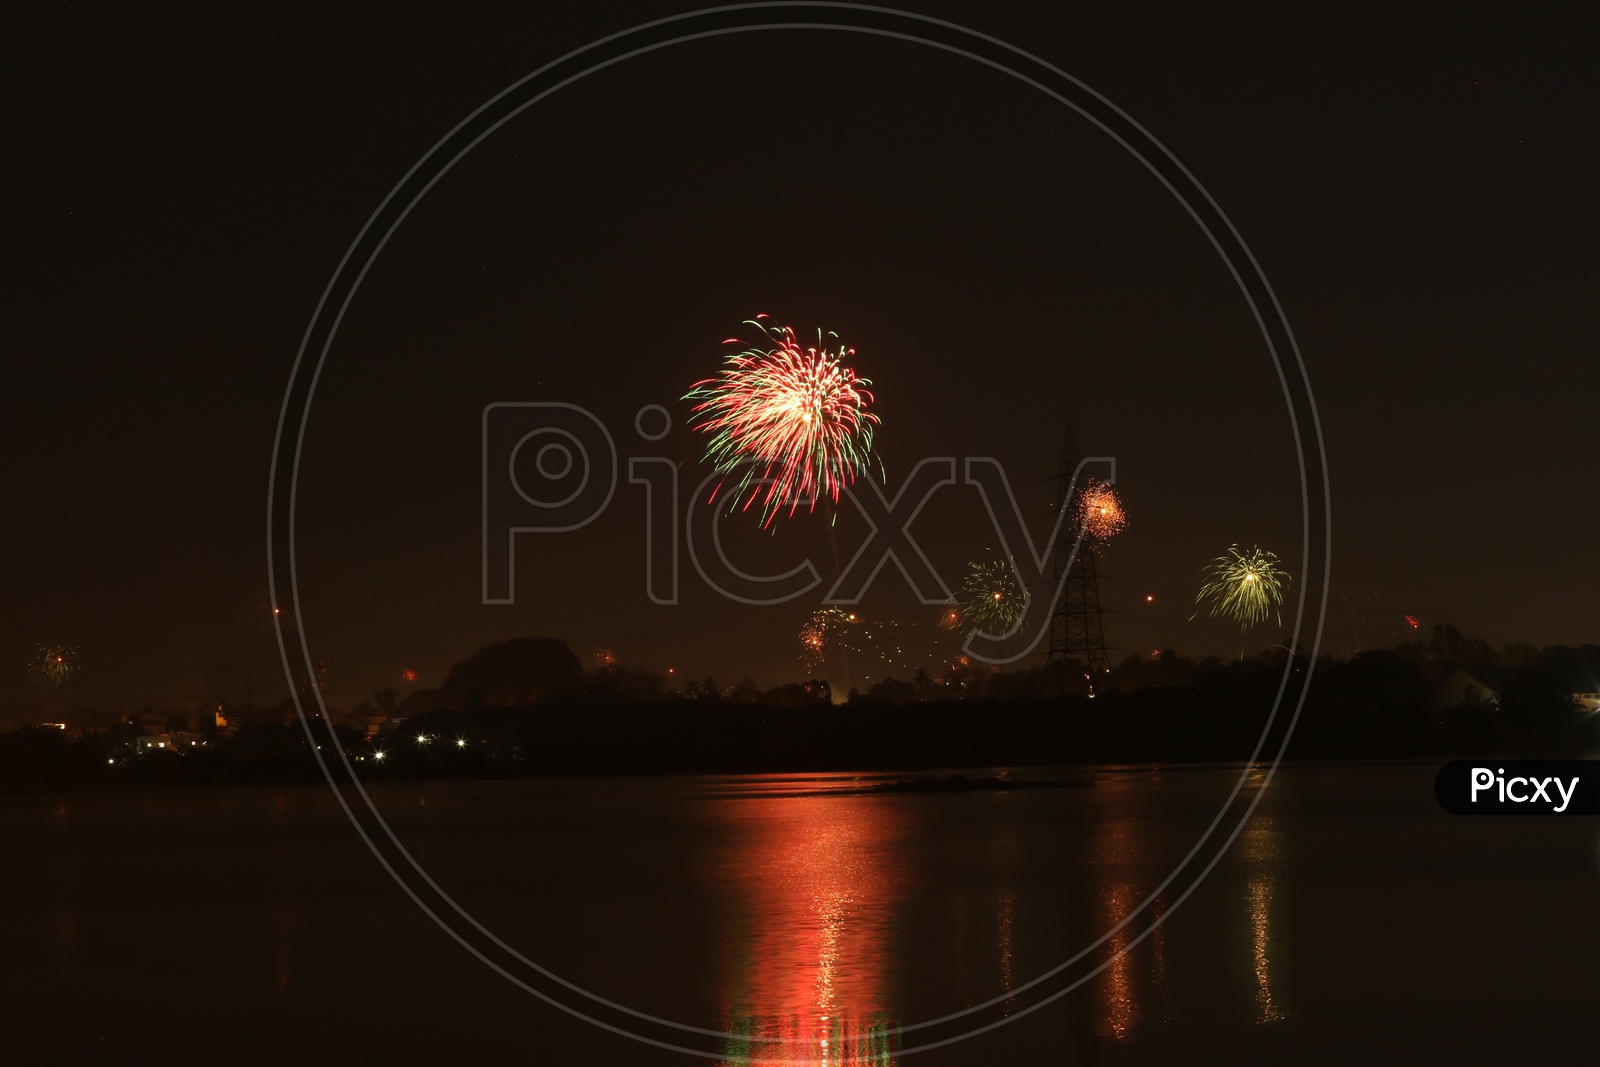 A Beautiful Long Exposure Shot Of a Diwali Crackers over a City View and Reflection on Water